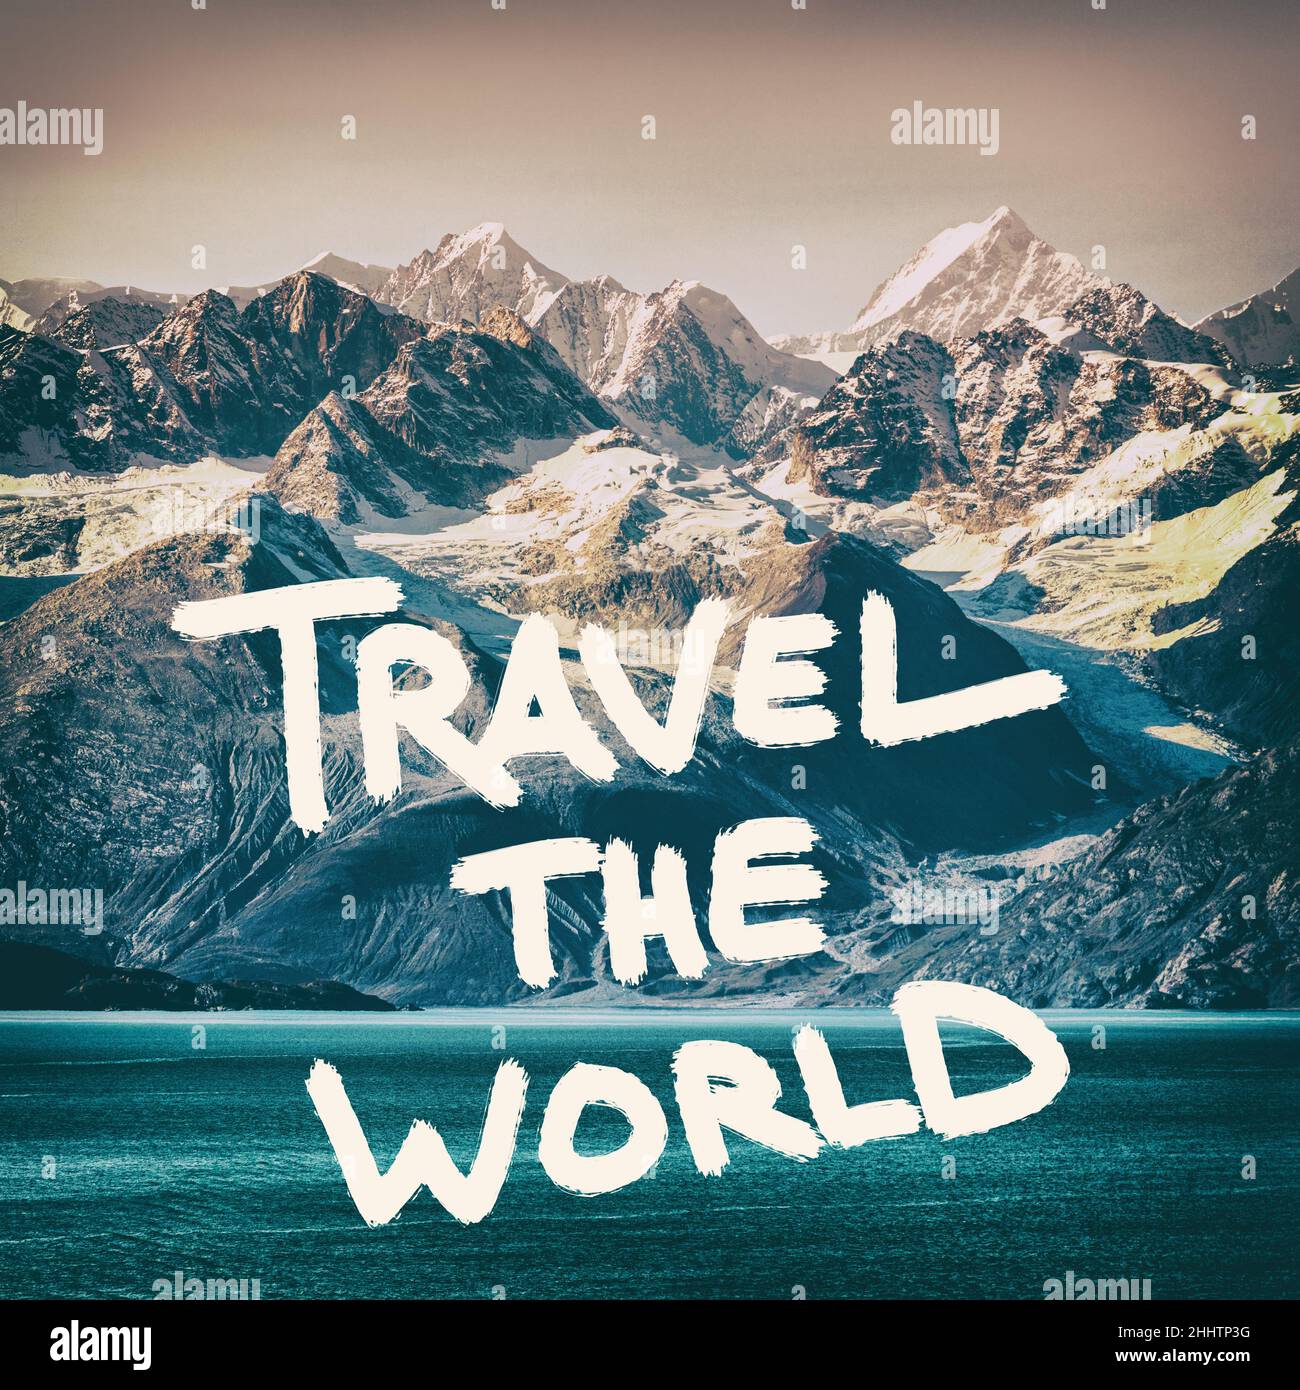 Travel the world inspirational quote on mountains nature landscape background. Adventure message to inspire people to go explore outside. Square crop Stock Photo